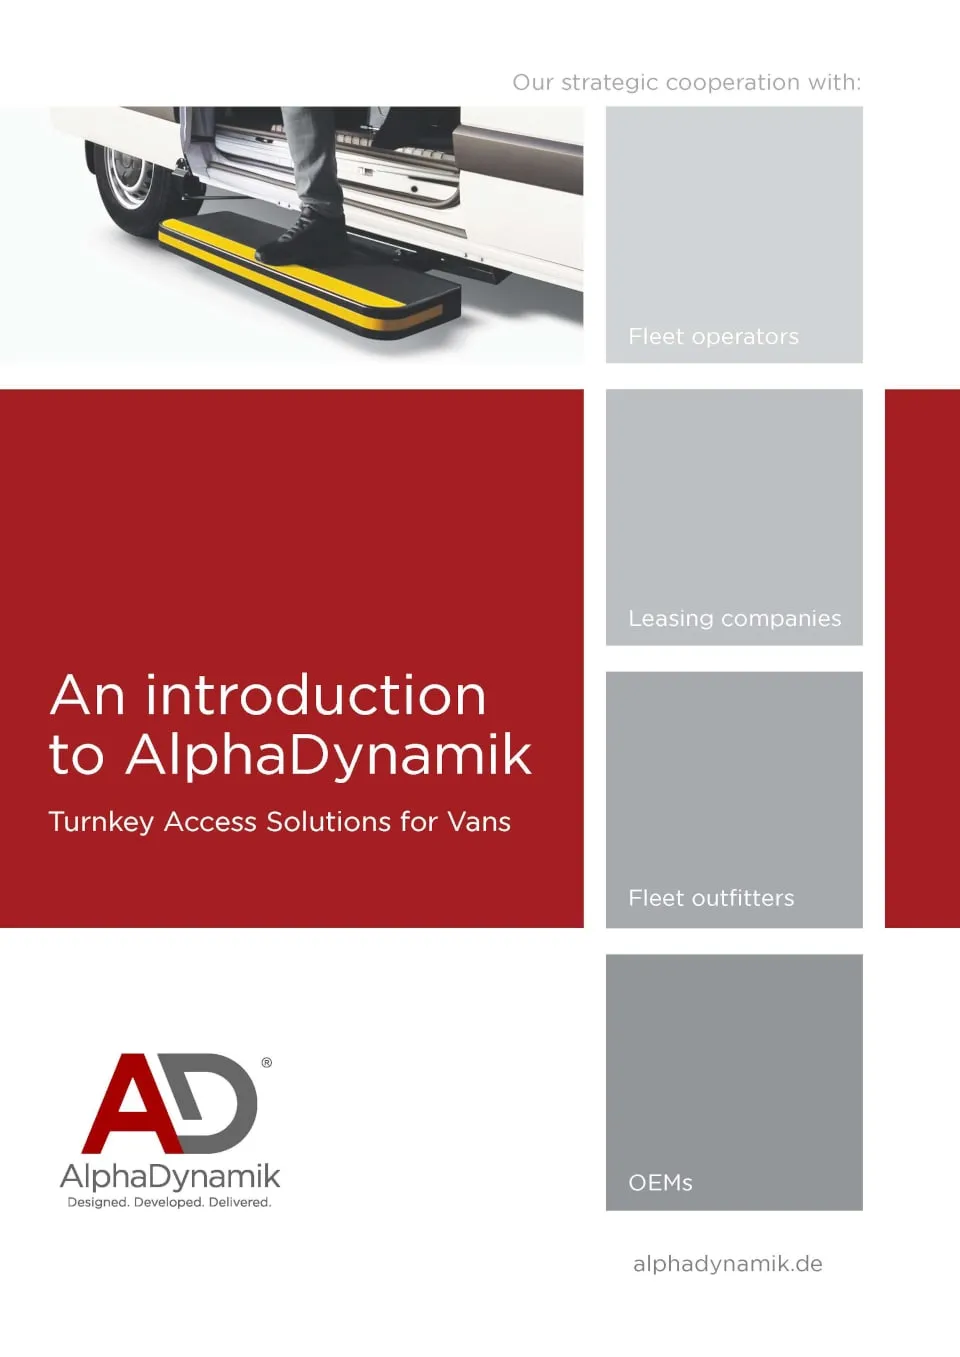 Turnkey Access Solutions for Vans by AlphaDynamik, Fleets and Fleet Operators Brochure